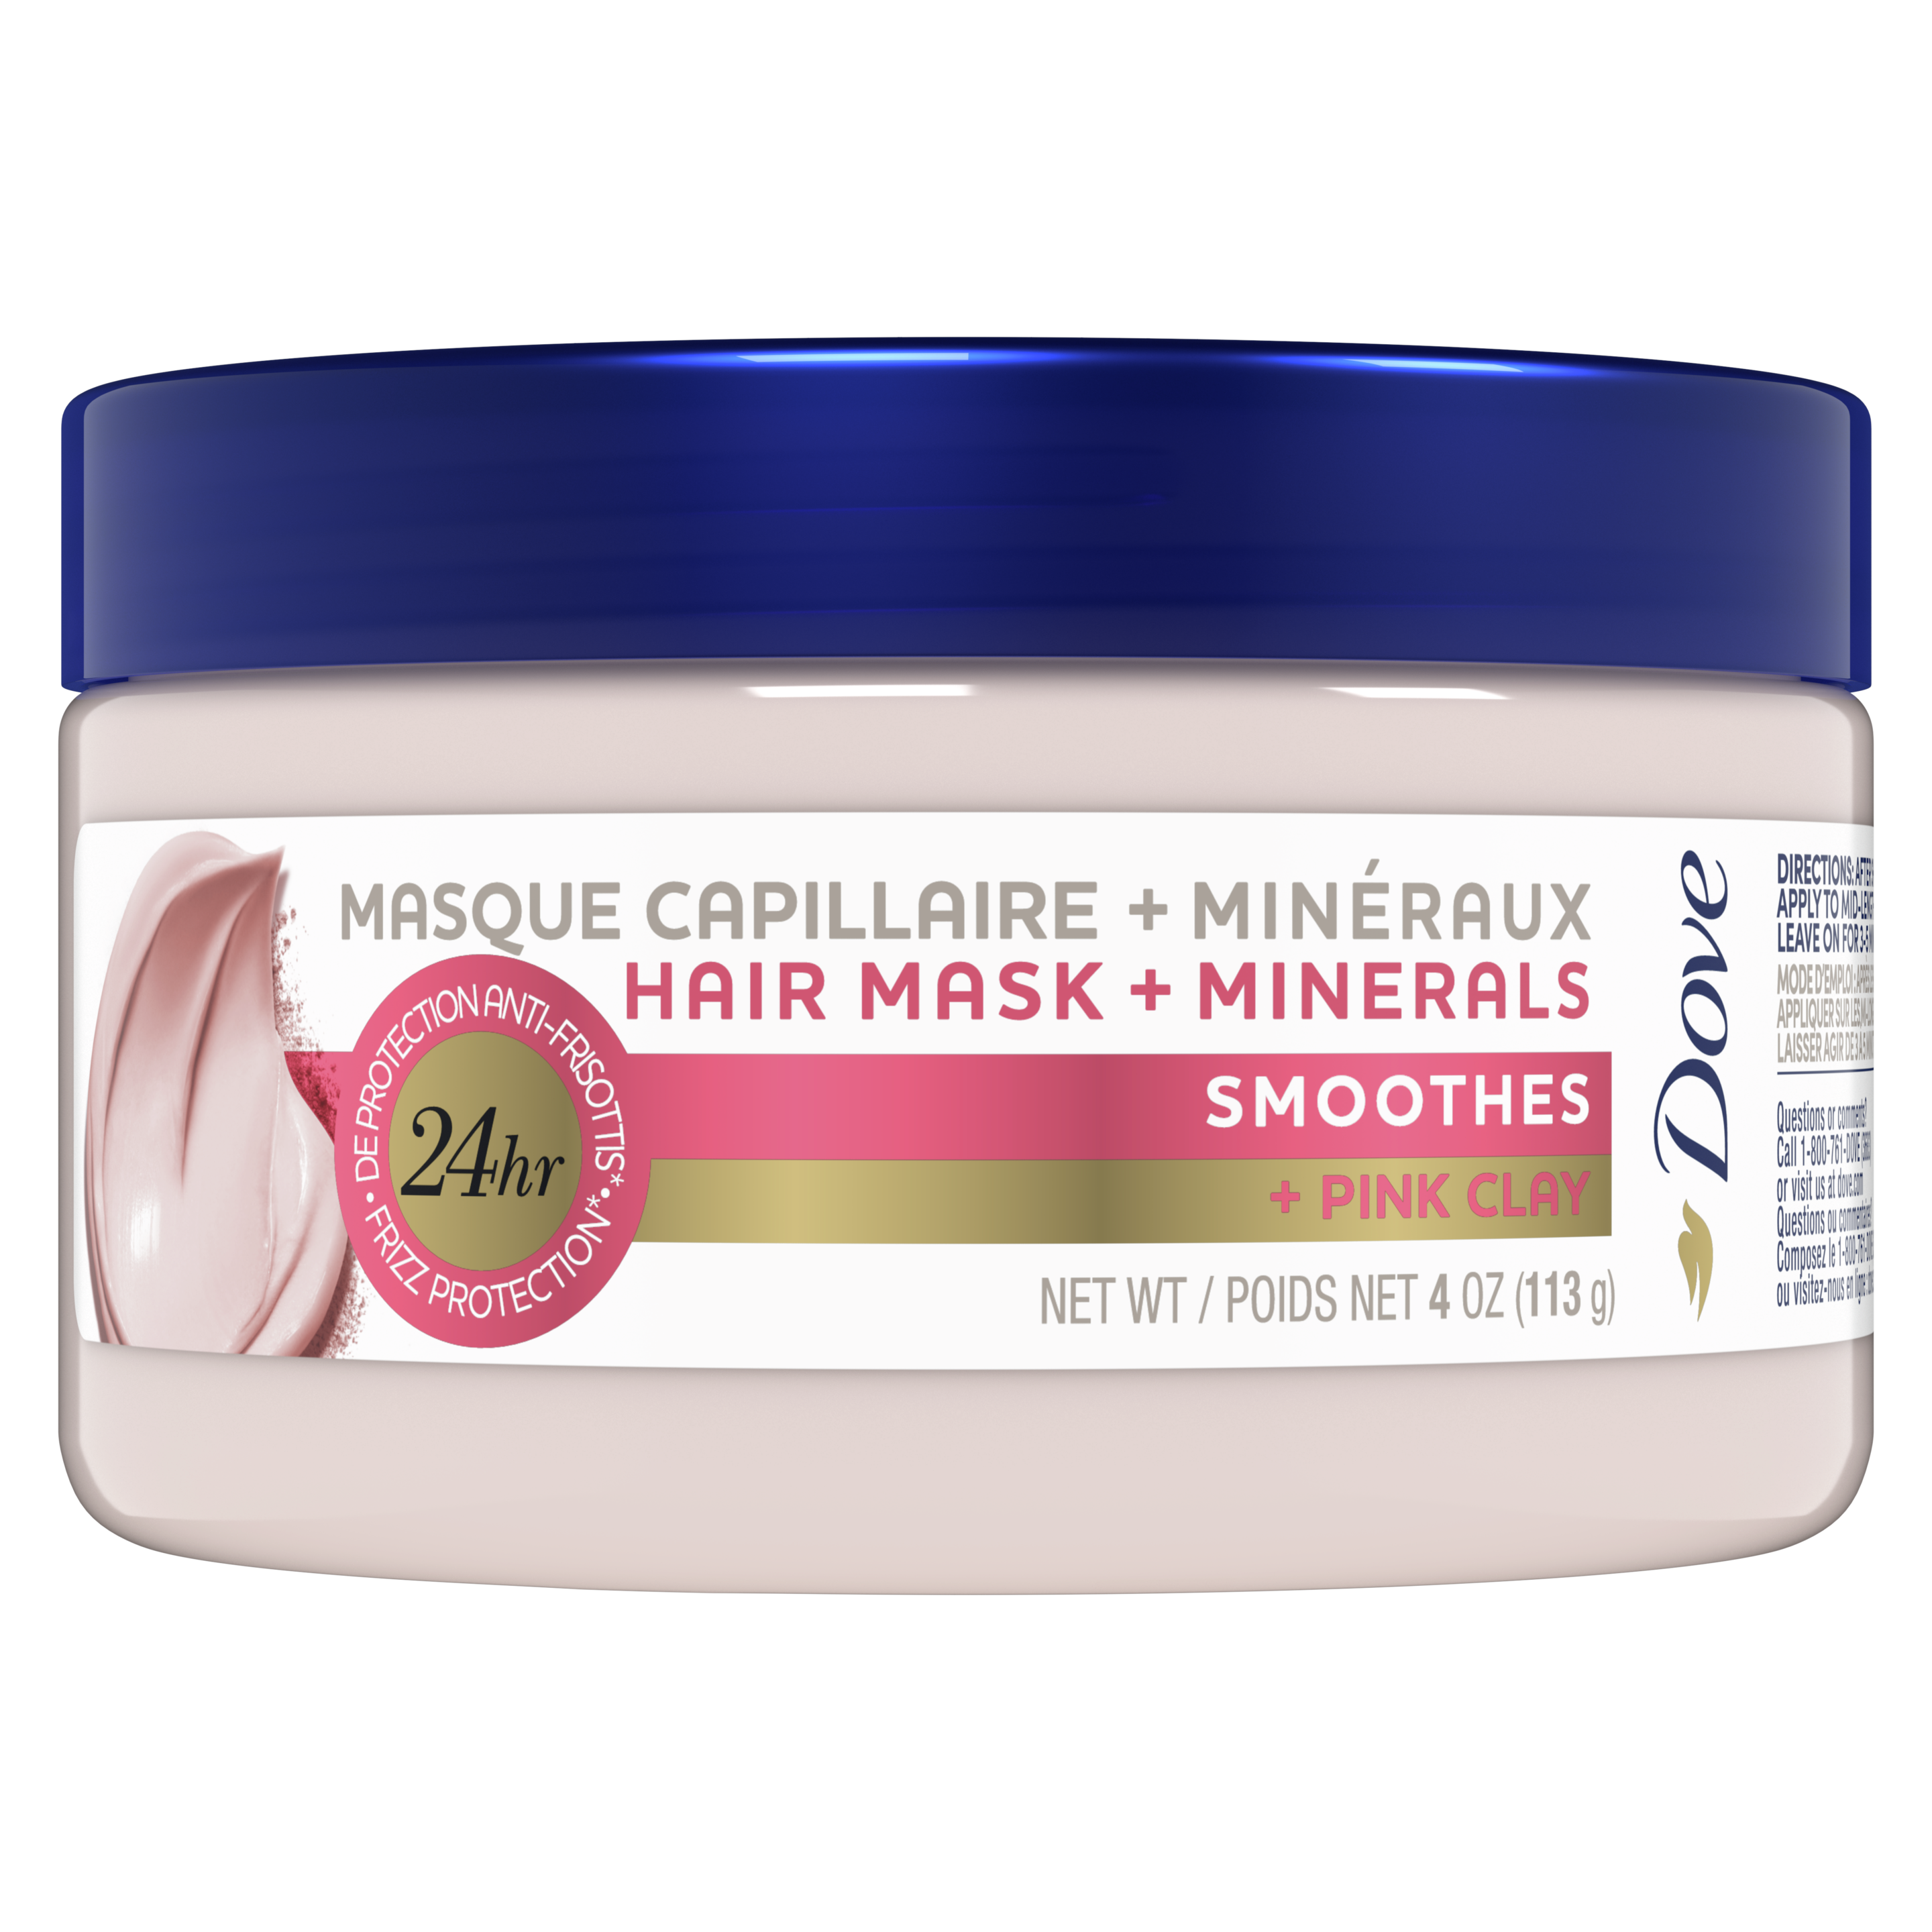 Mineral Hair Mask Smoothes + Pink Clay